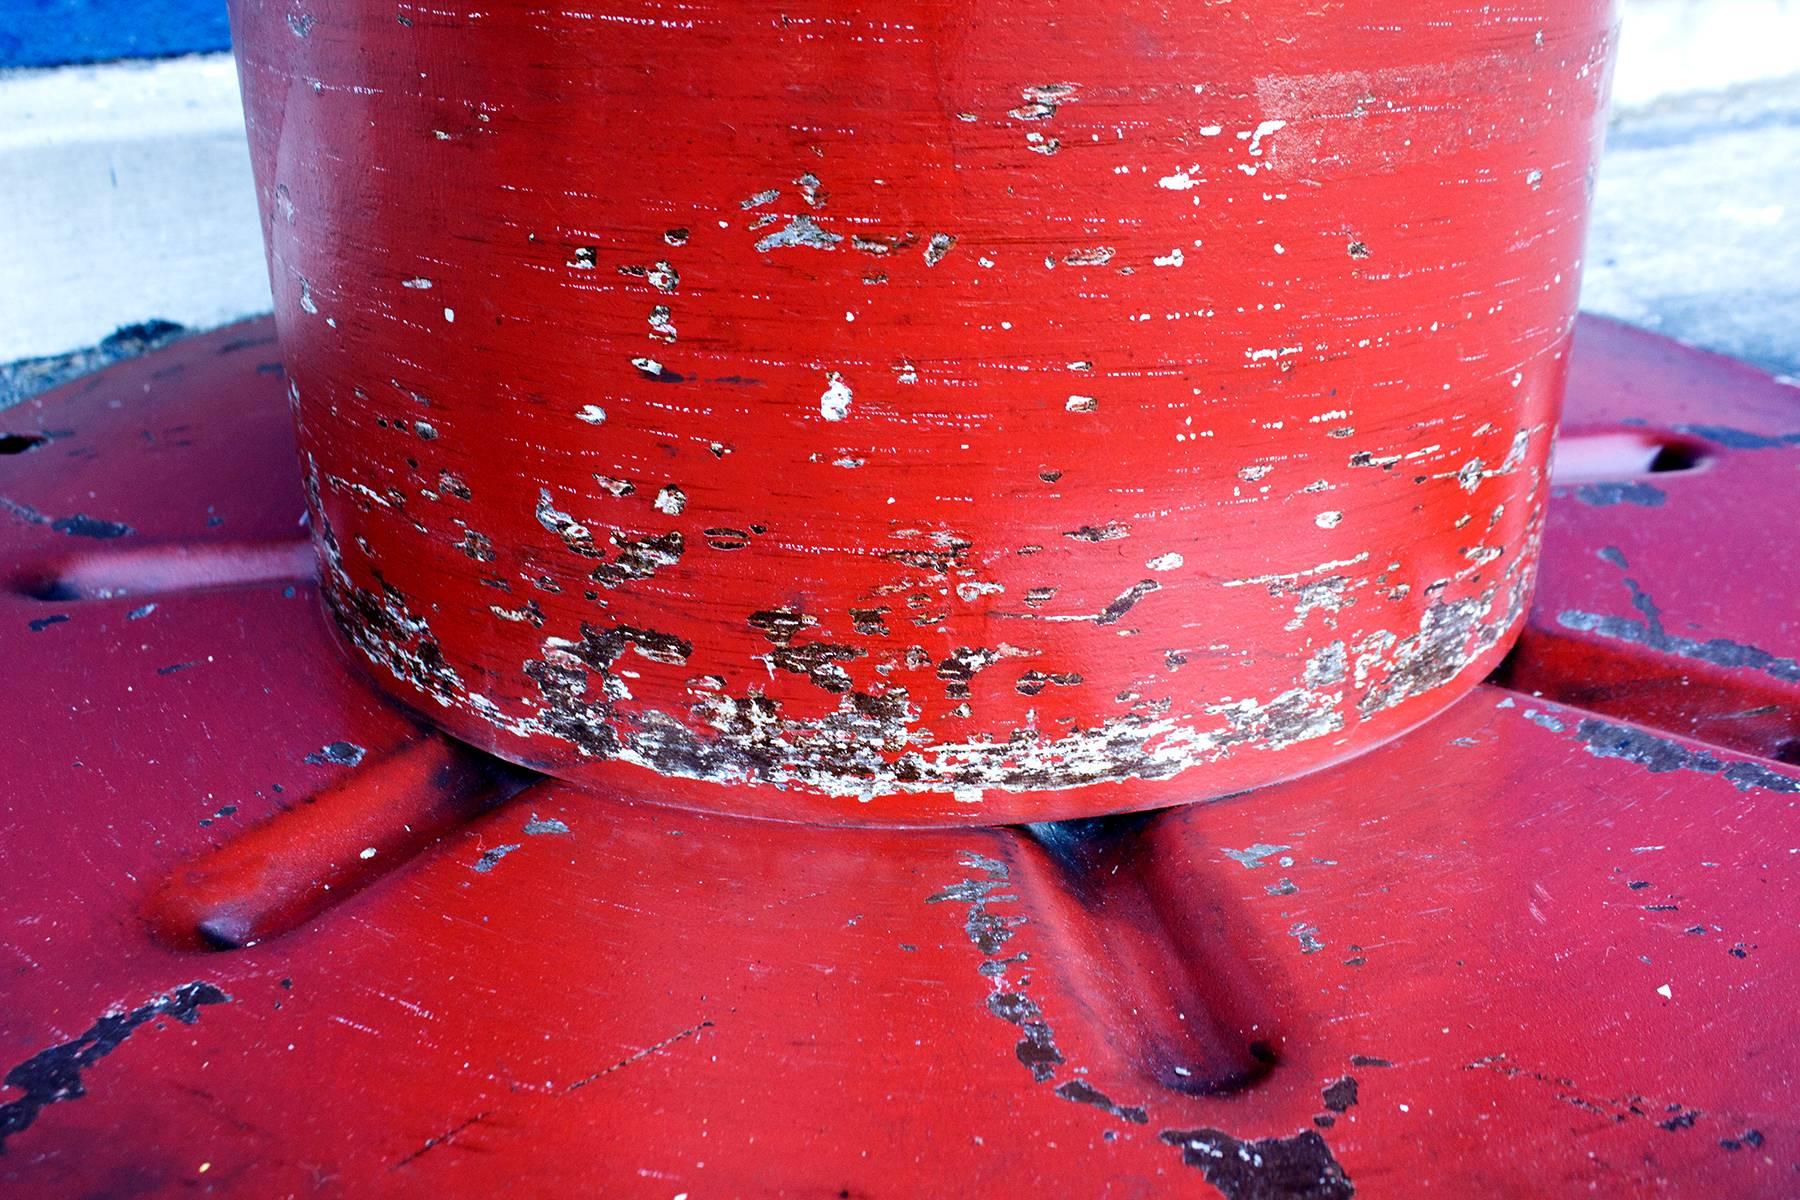 Rare vintage steel cable spool with distressed red paint finish. Can be made into a great round upholstered bench or glass coffee table. Excellent Industrial centerpiece for the loft dweller. Very heavy.

Dimensions: 36" diameter x 19